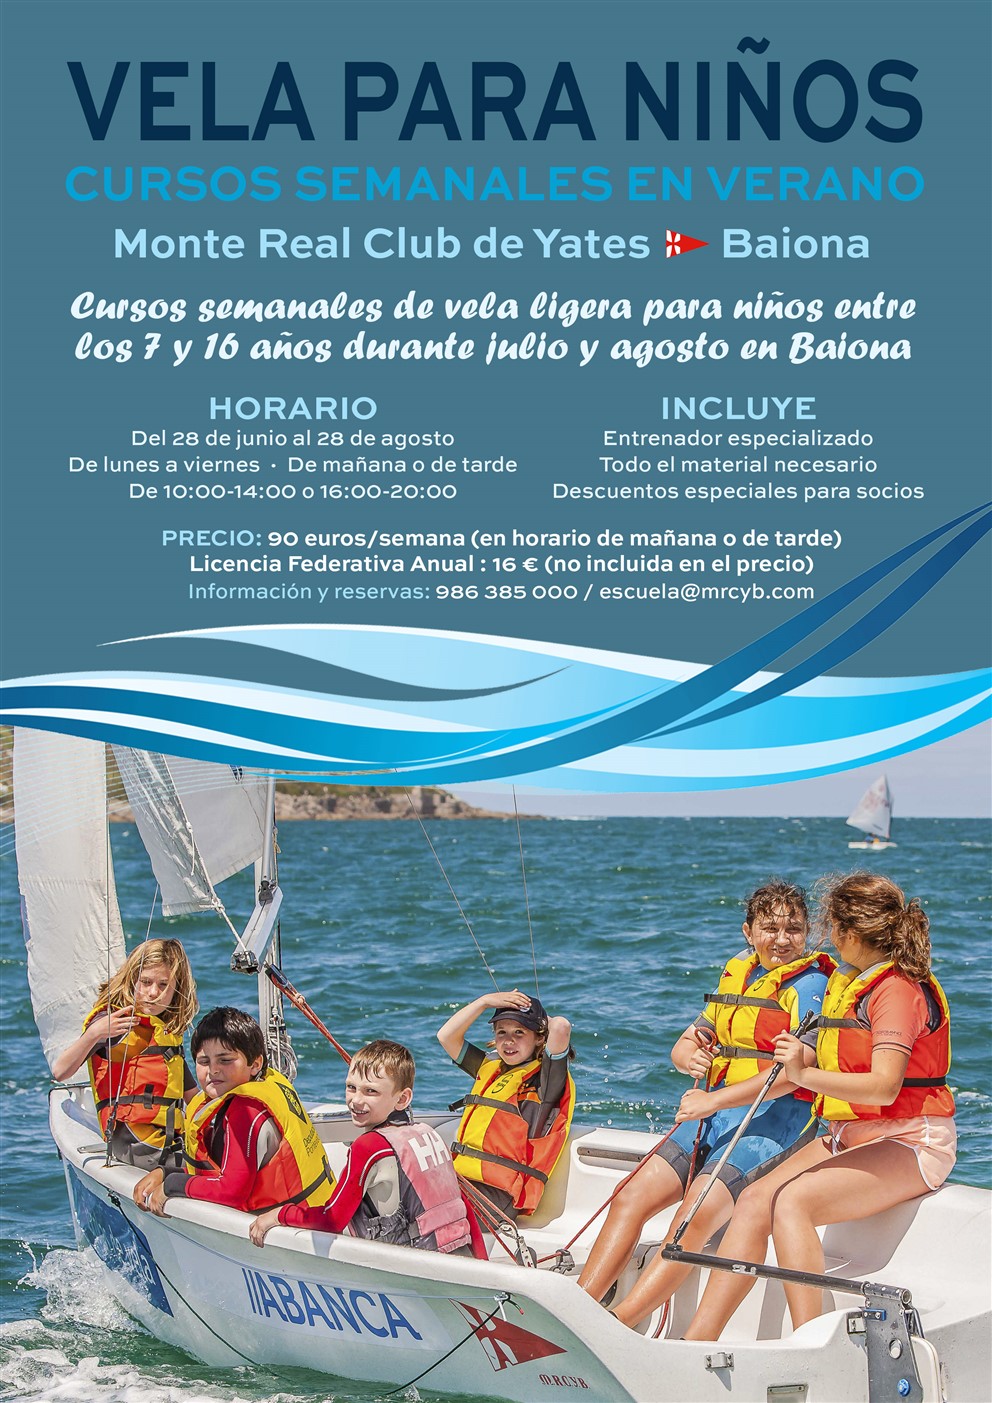 Sailing courses for children in Baiona